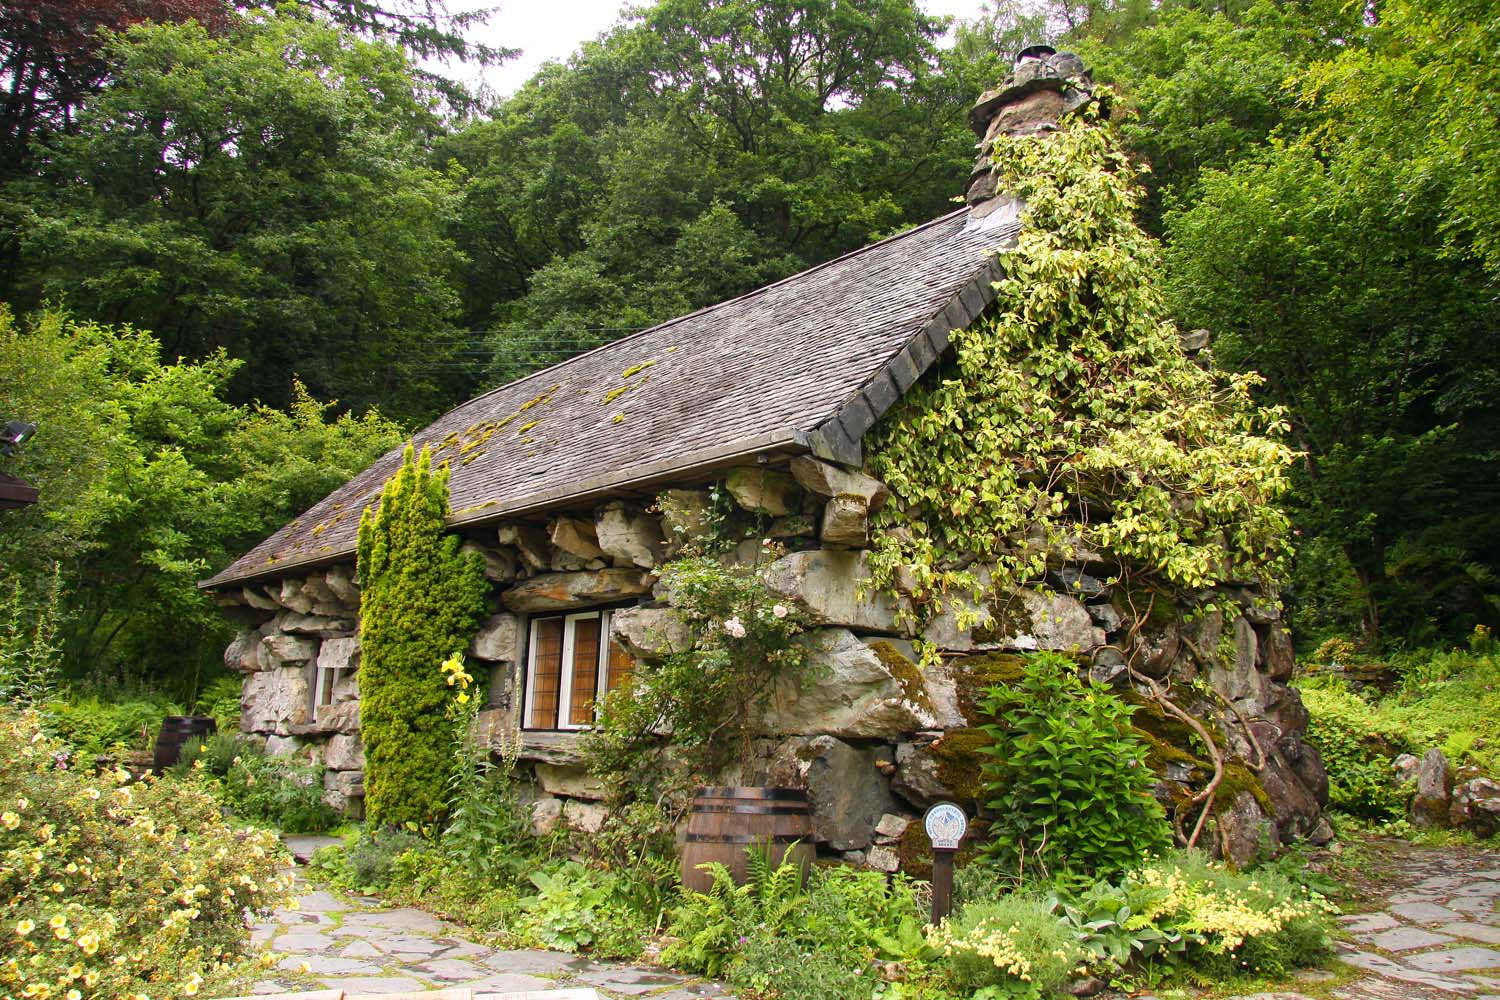 An example of a Tŷ Unnos – The Ugly House near Betws-Y-Coed by Steve Daniels, CC BY-SA 2.0, via Wikimedia Commons